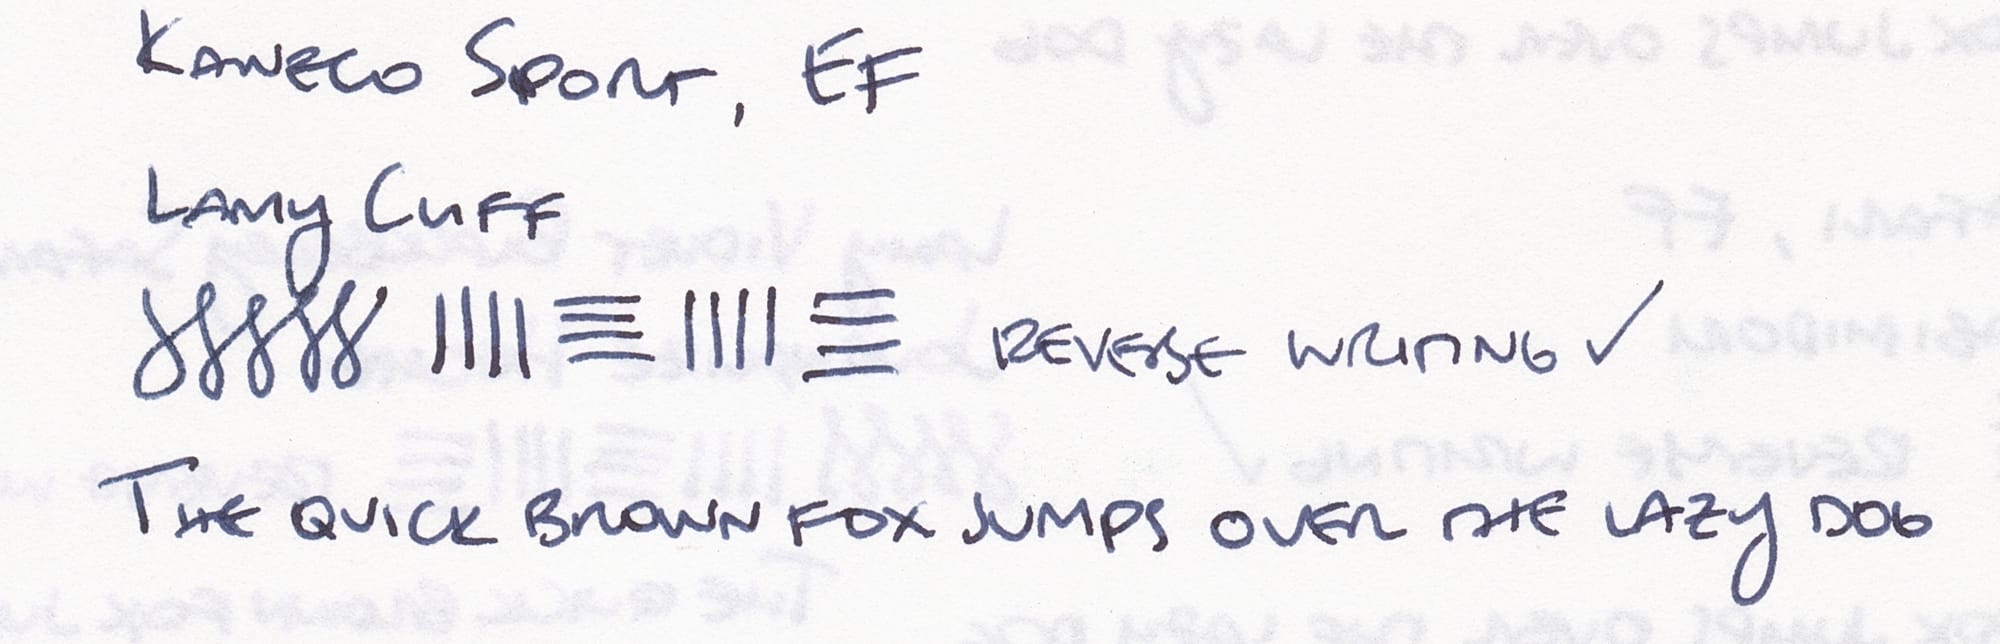 Writing sample using a Kaweco Sport fountain pen with an EF nib, listing the pen name, ink name, some figure-8s, horizontal and vertical lines, demonstration of reverse writing, and "The quick brown fox jumps over the lazy dog"